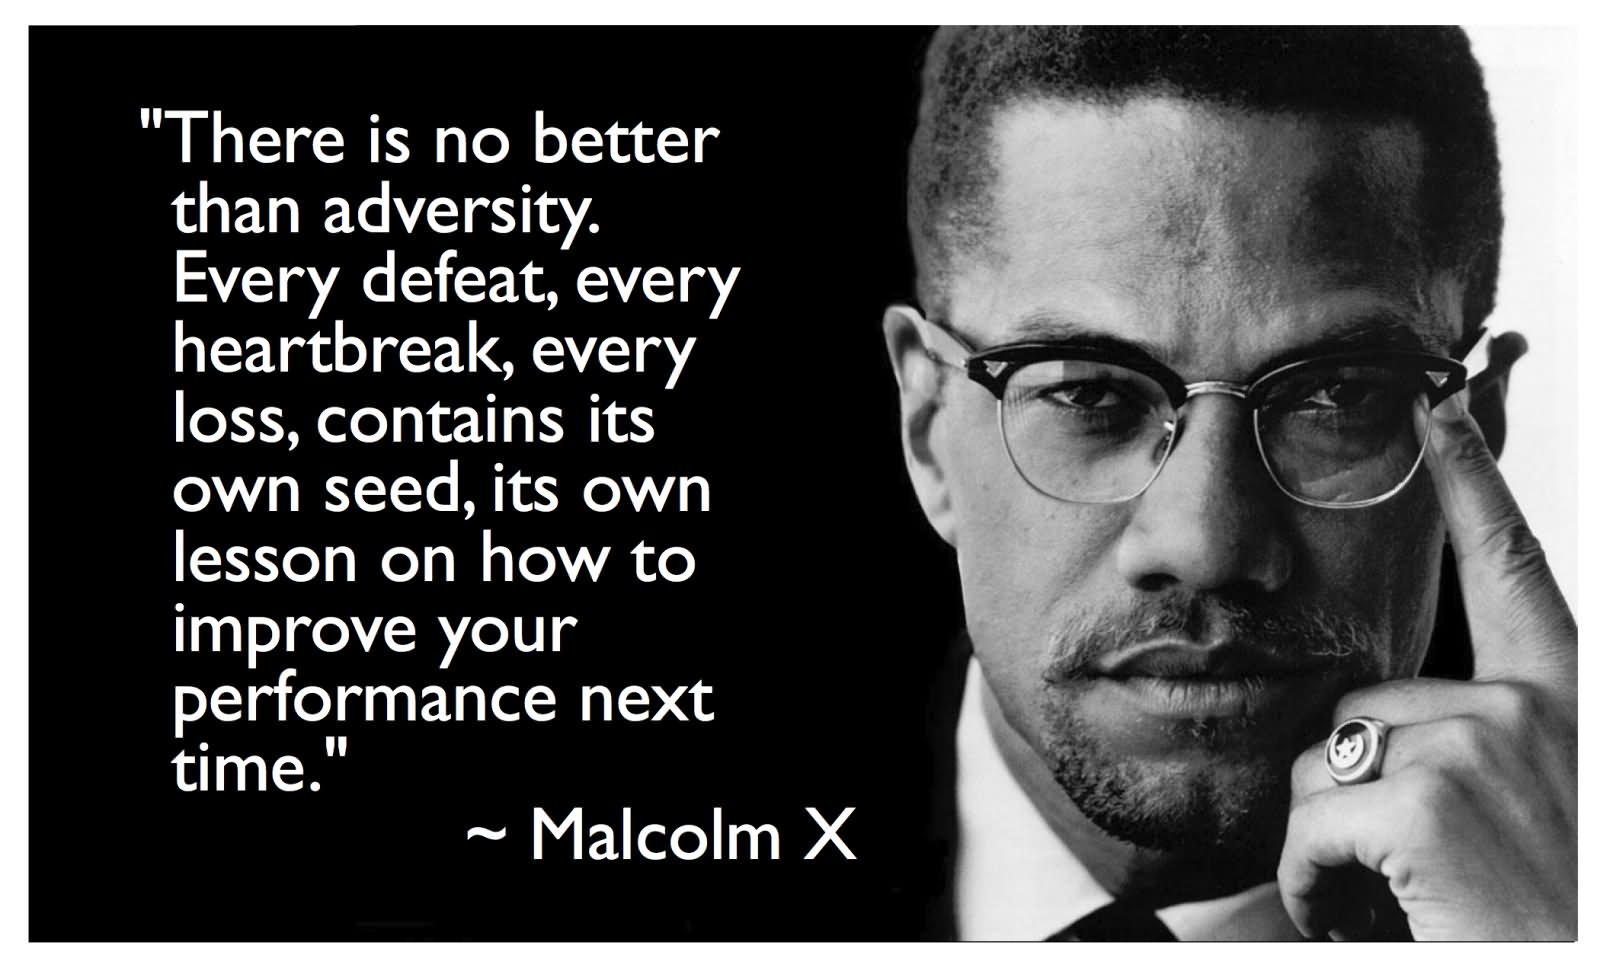 There is no better than adversity. ... heartbreak, every loss, contains its own seed, its own lesson on how to improve your performance next time  - Malcolm X